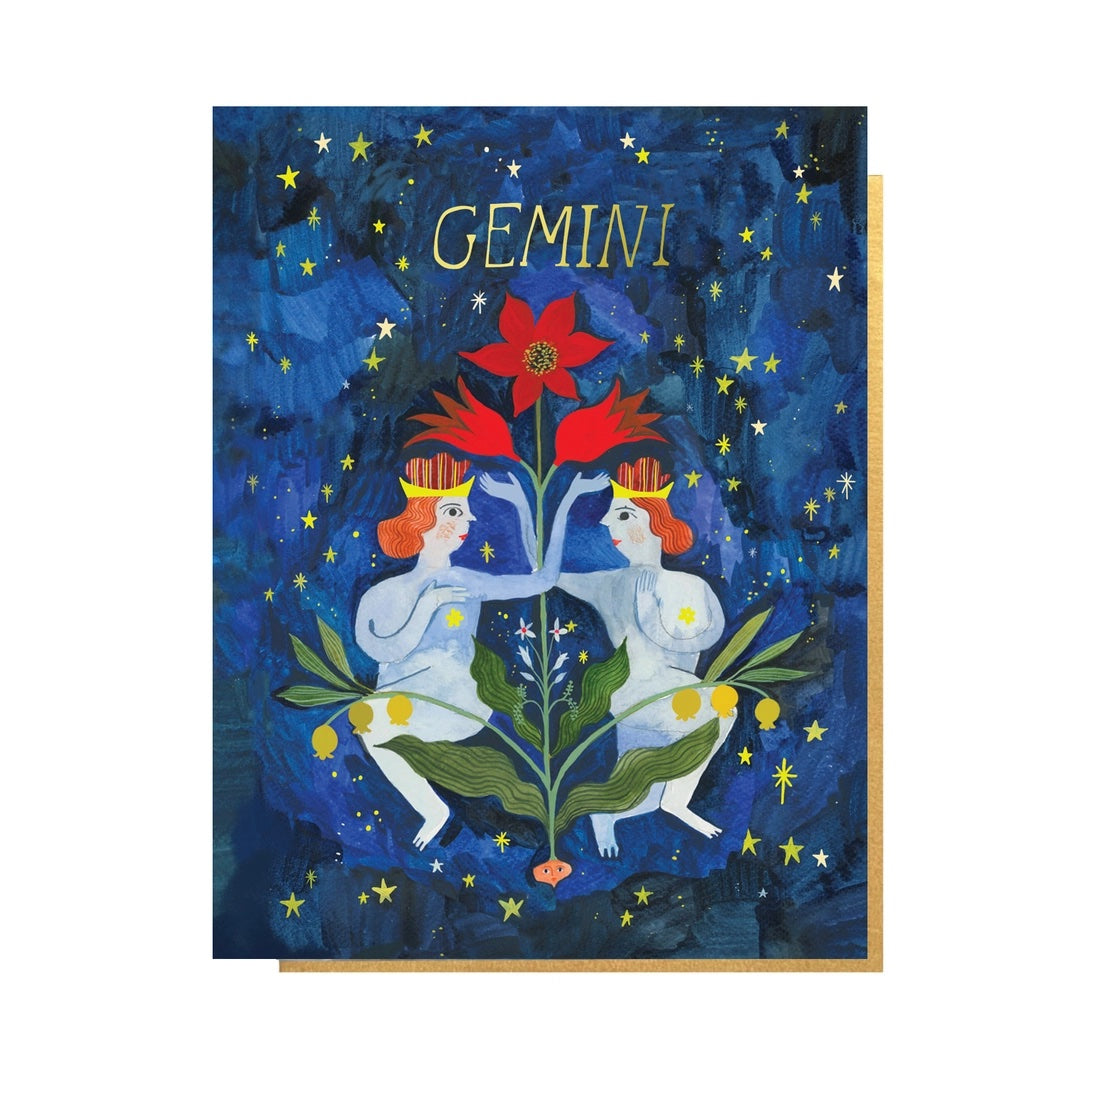 Folding card with illustration of twins intertwined with flowers in starry sky Gemini written above